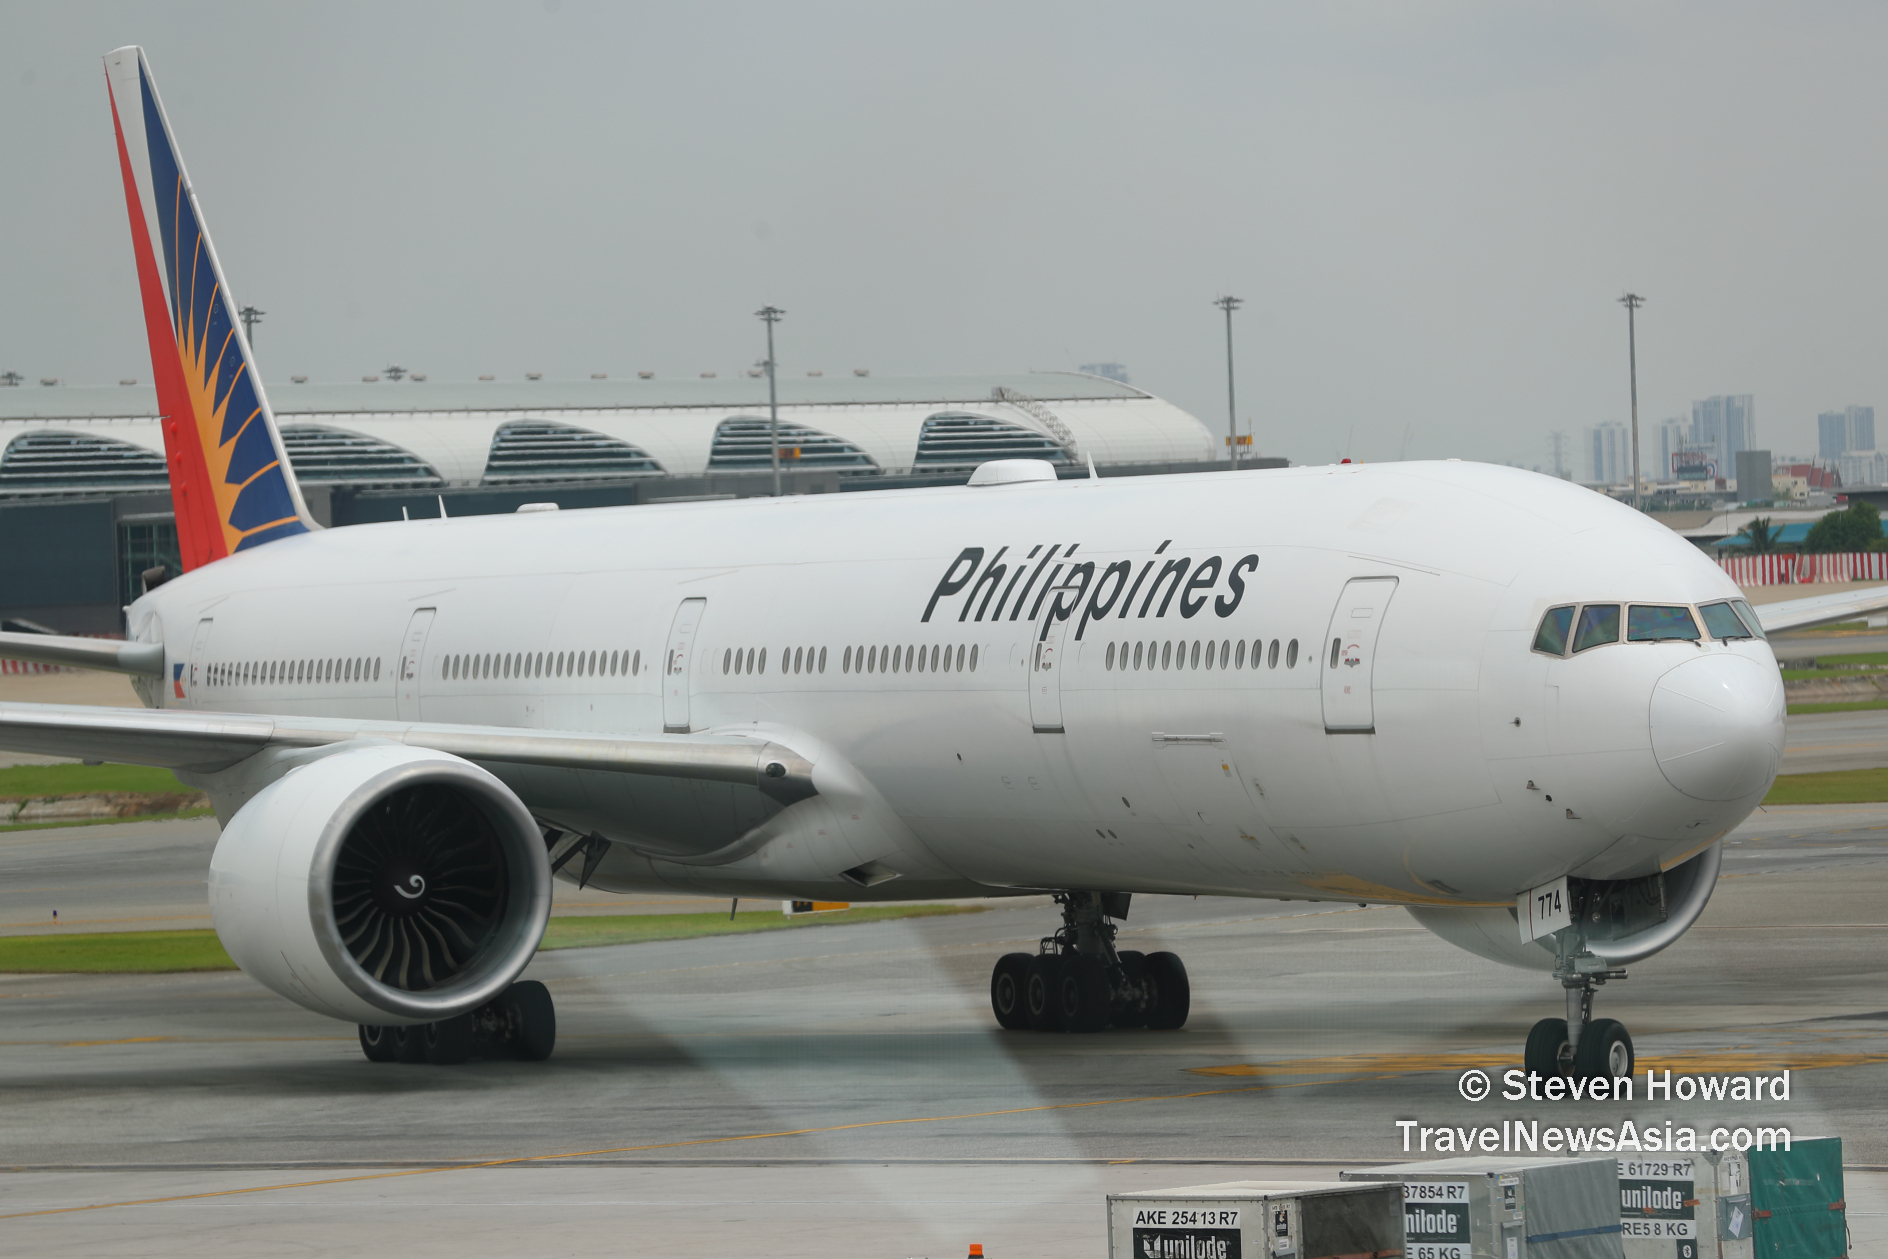 Philippine Airlines at BKK. Picture by Steven Howard of TravelNewsAsia.com Click to enlarge.